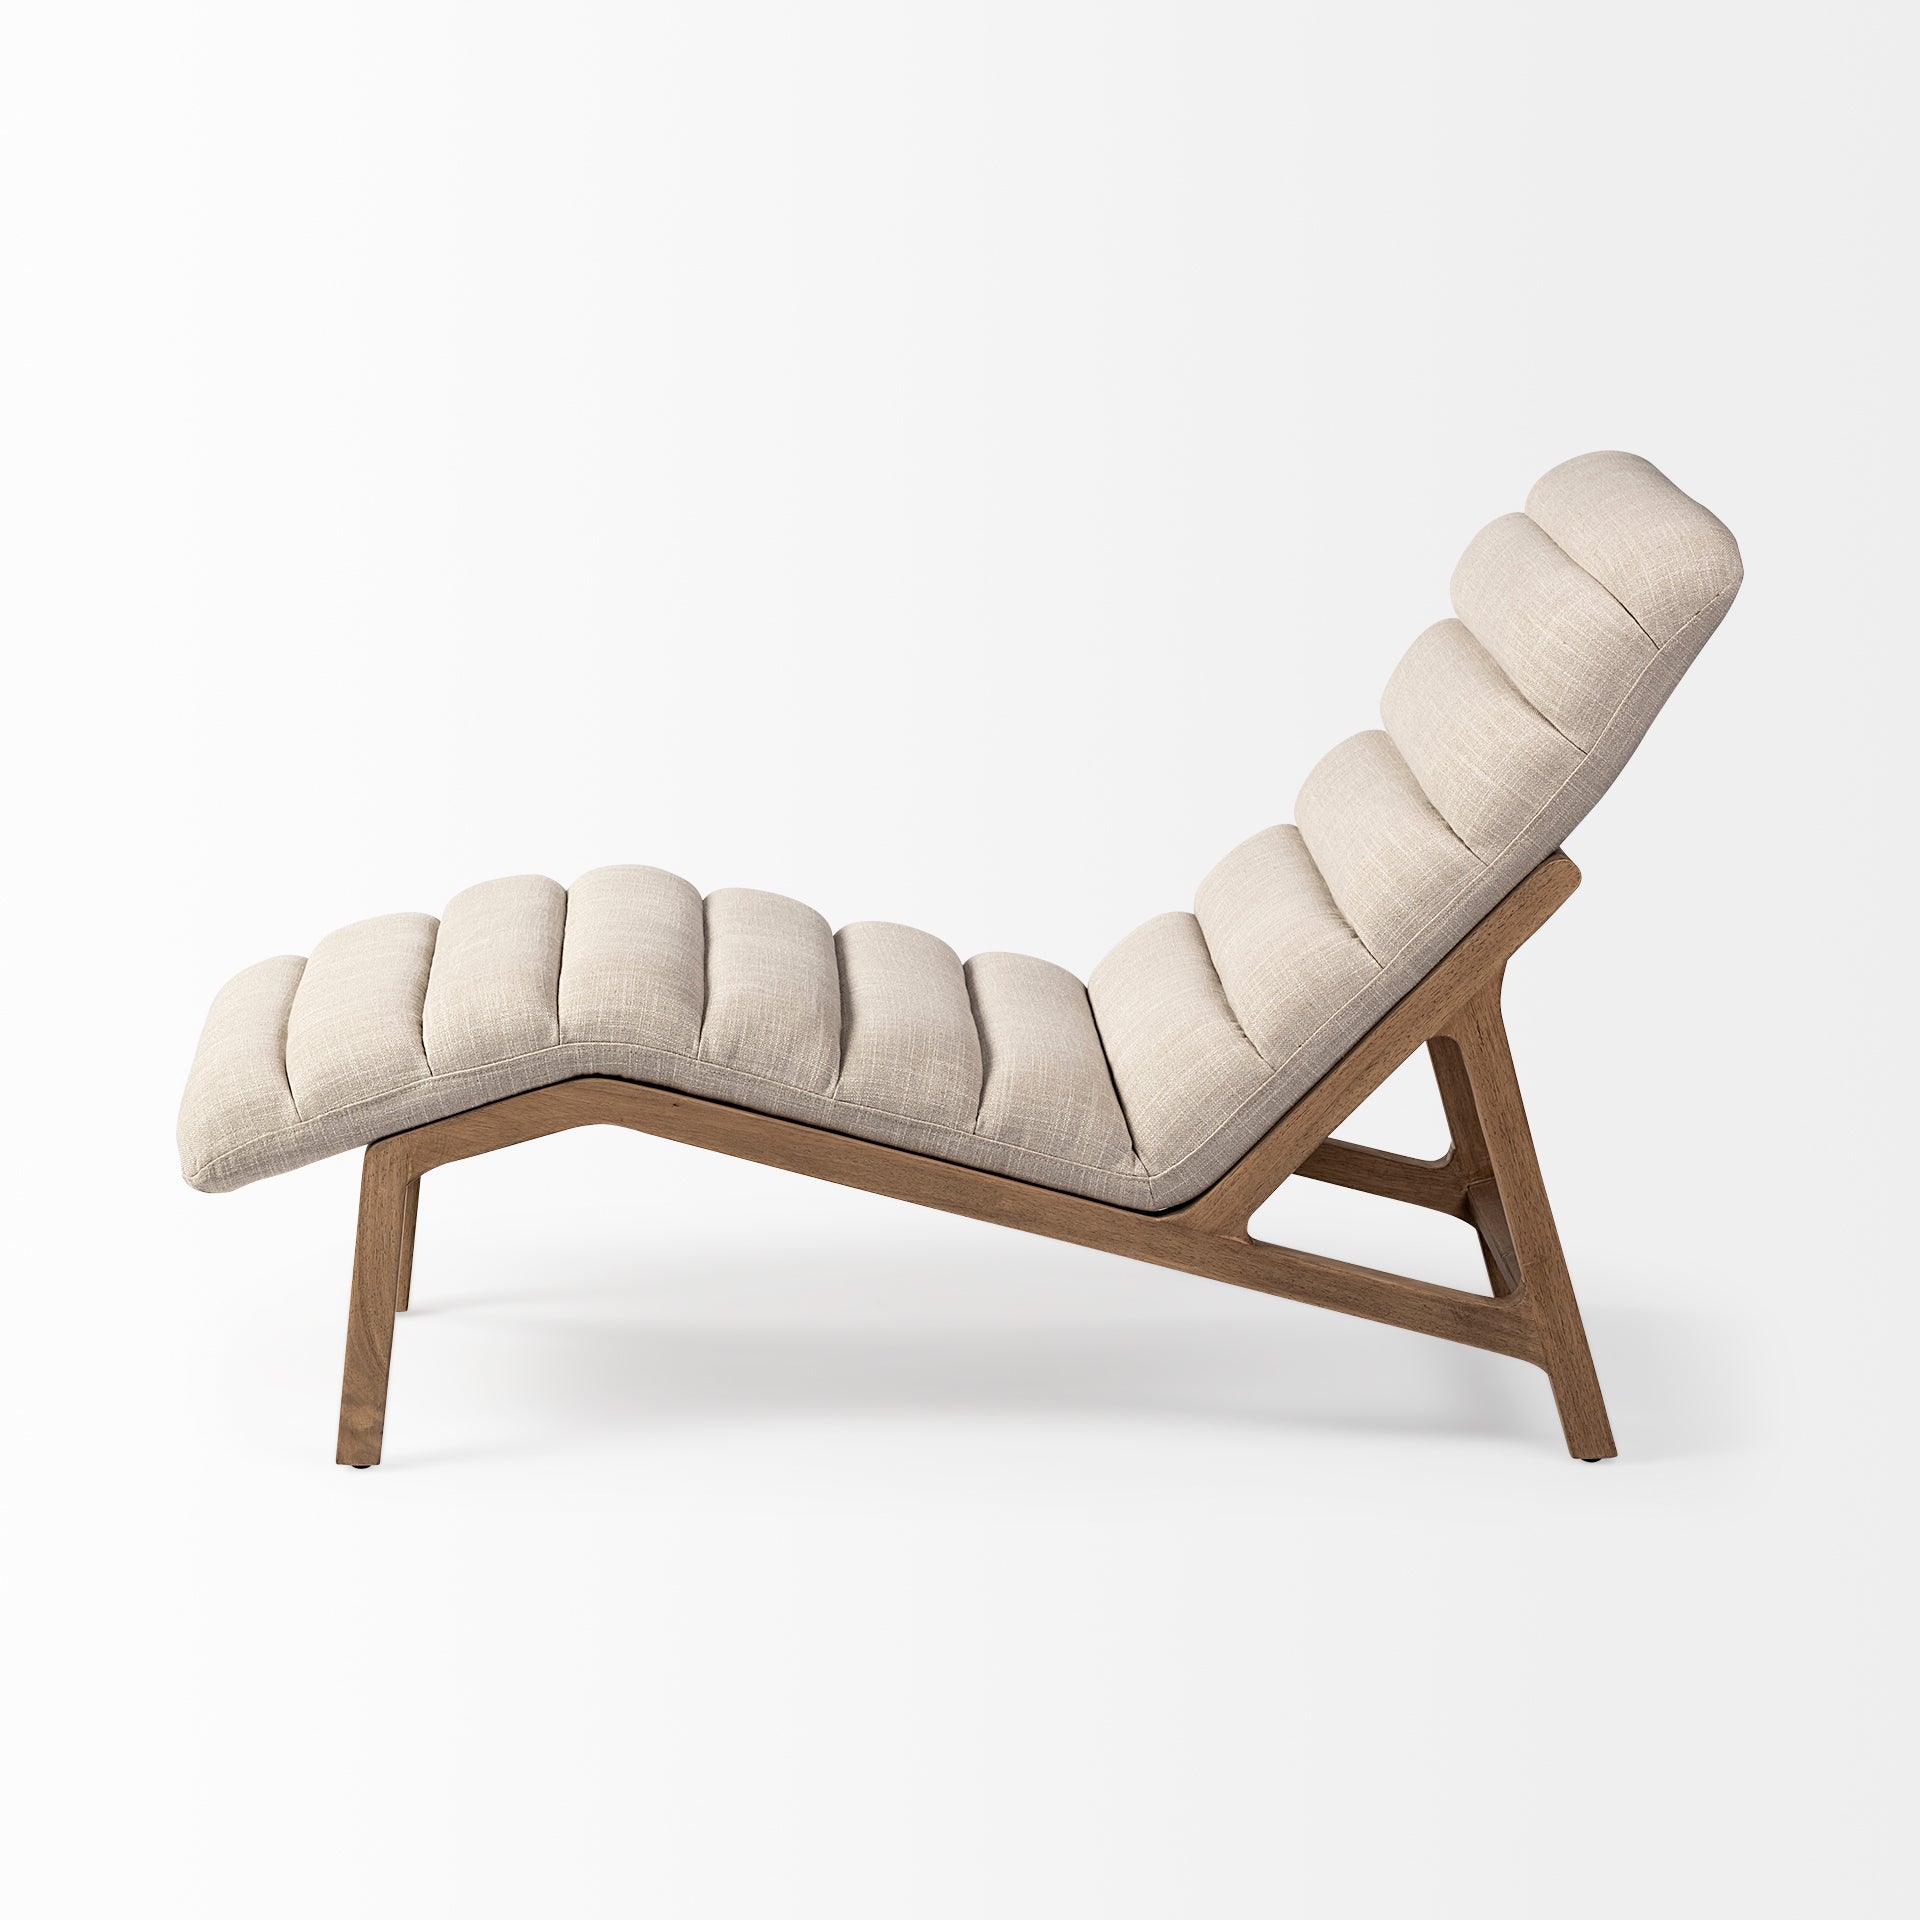 Pierre Chaise Lounge